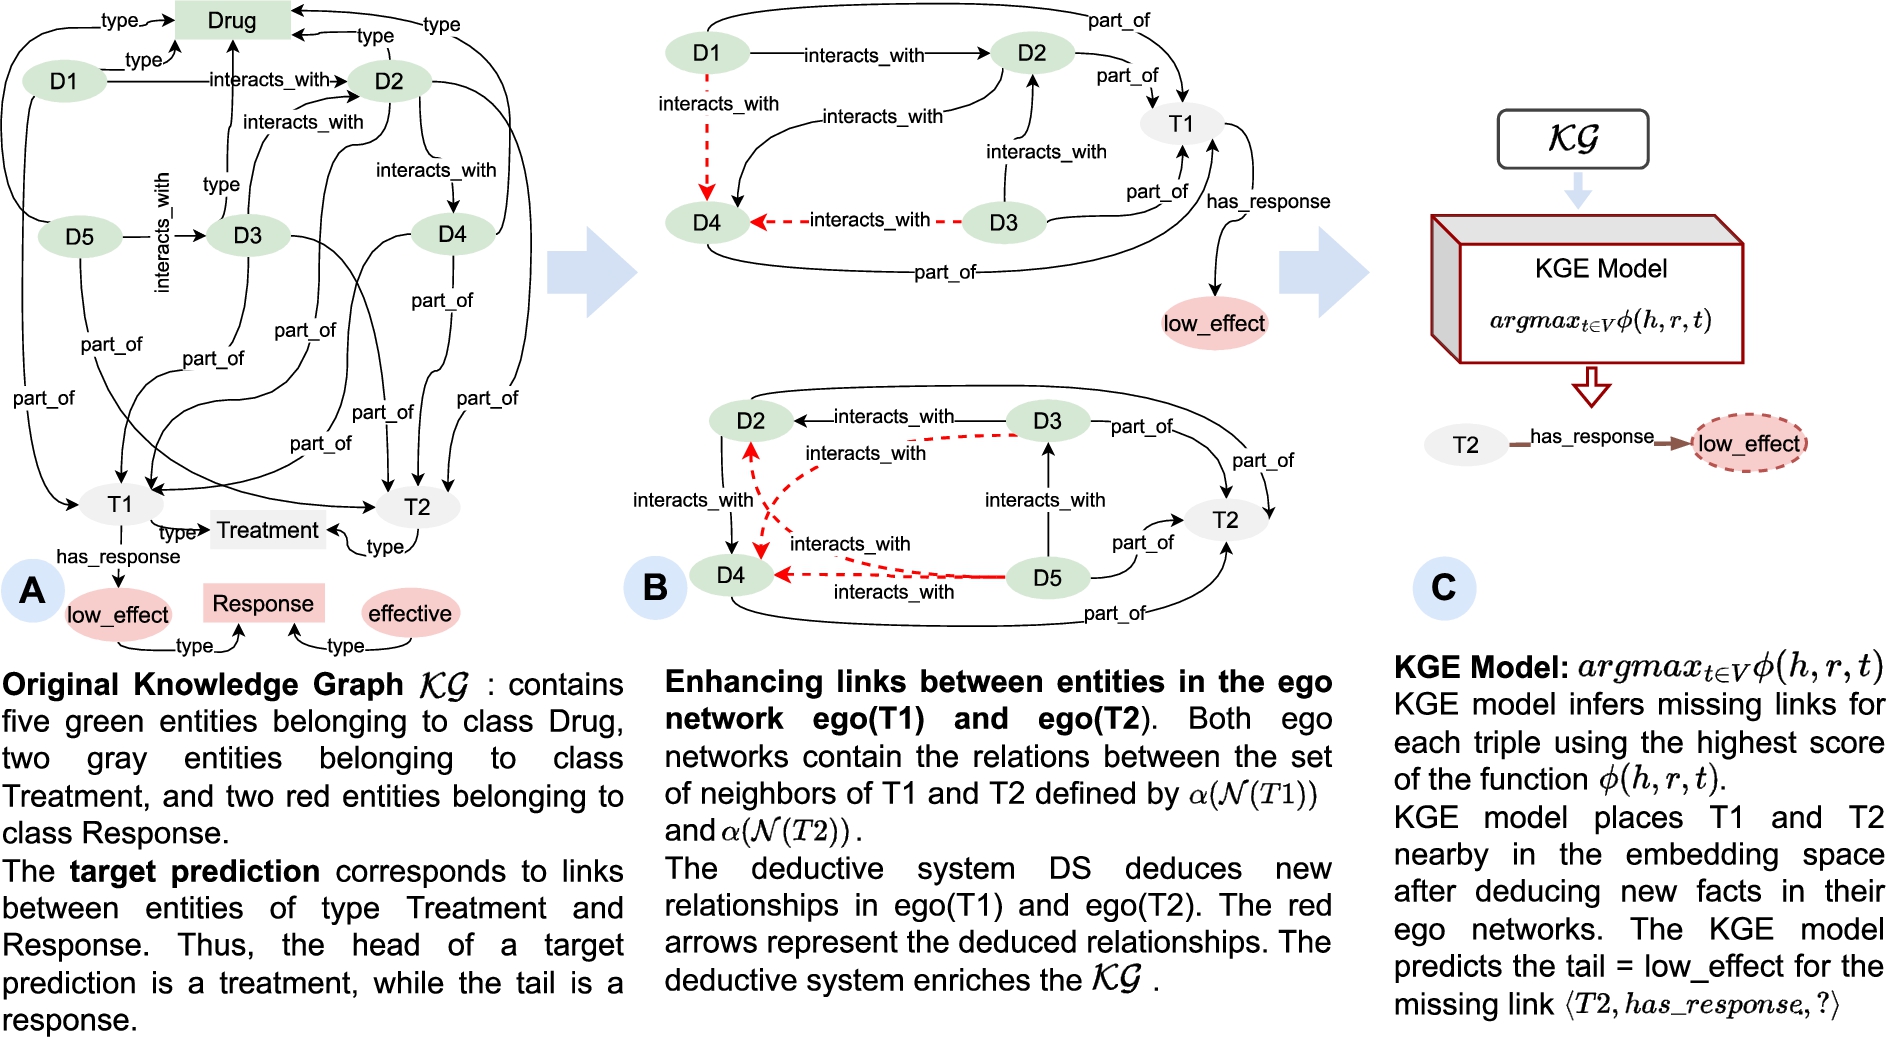 Running example. Figure 5 illustrates the proposed steps to enhance the predictive performance of KGE models. Step A: given a KG and an abstract target prediction τ=⟨Treatment, has_response, Response⟩ the ego network EgoG(v) is defined. Step B: illustrates the neighbors of the ego network EgoG(T1) and EgoG(T2) and a deductive system based on the head and tail of τ deduces new relationships to enhances the neighbors NG(EgoG(v)). Step C: depicts a KGE model in which predictive performance is enhanced by symbolic reasoning. The relationships in NG(EgoG(v)) improving the link prediction task in G|τ.